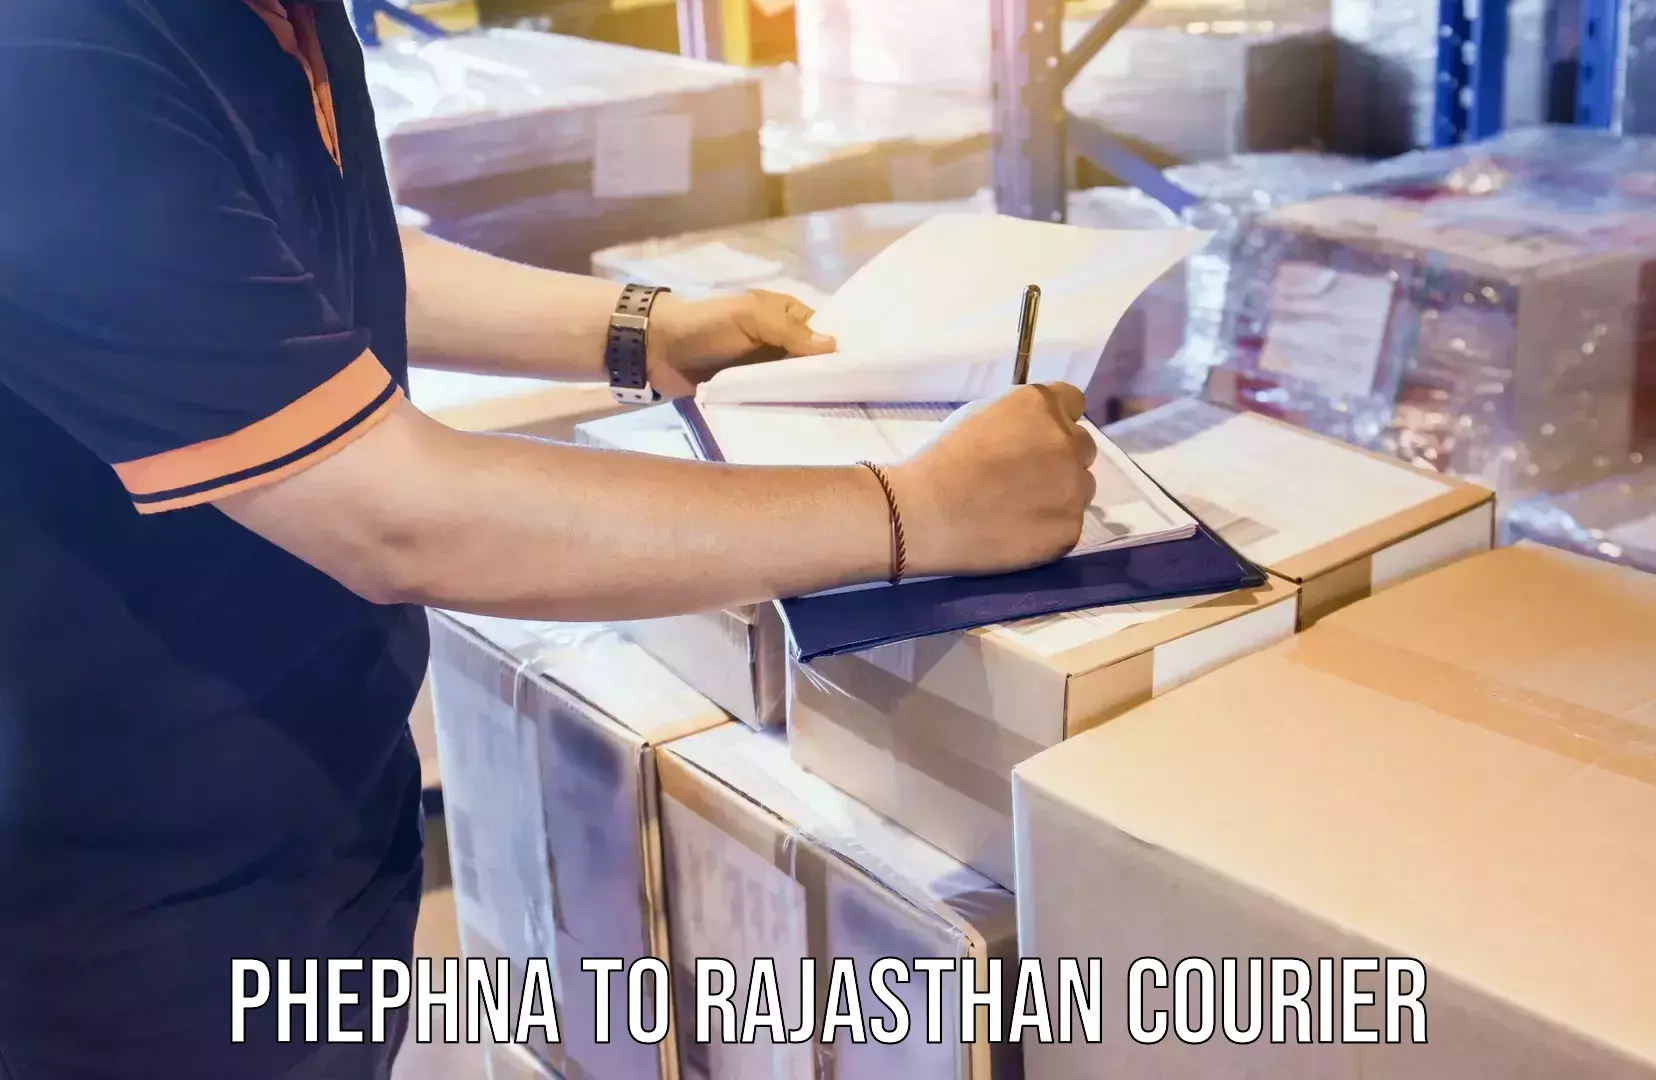 Efficient moving company Phephna to Rajasthan